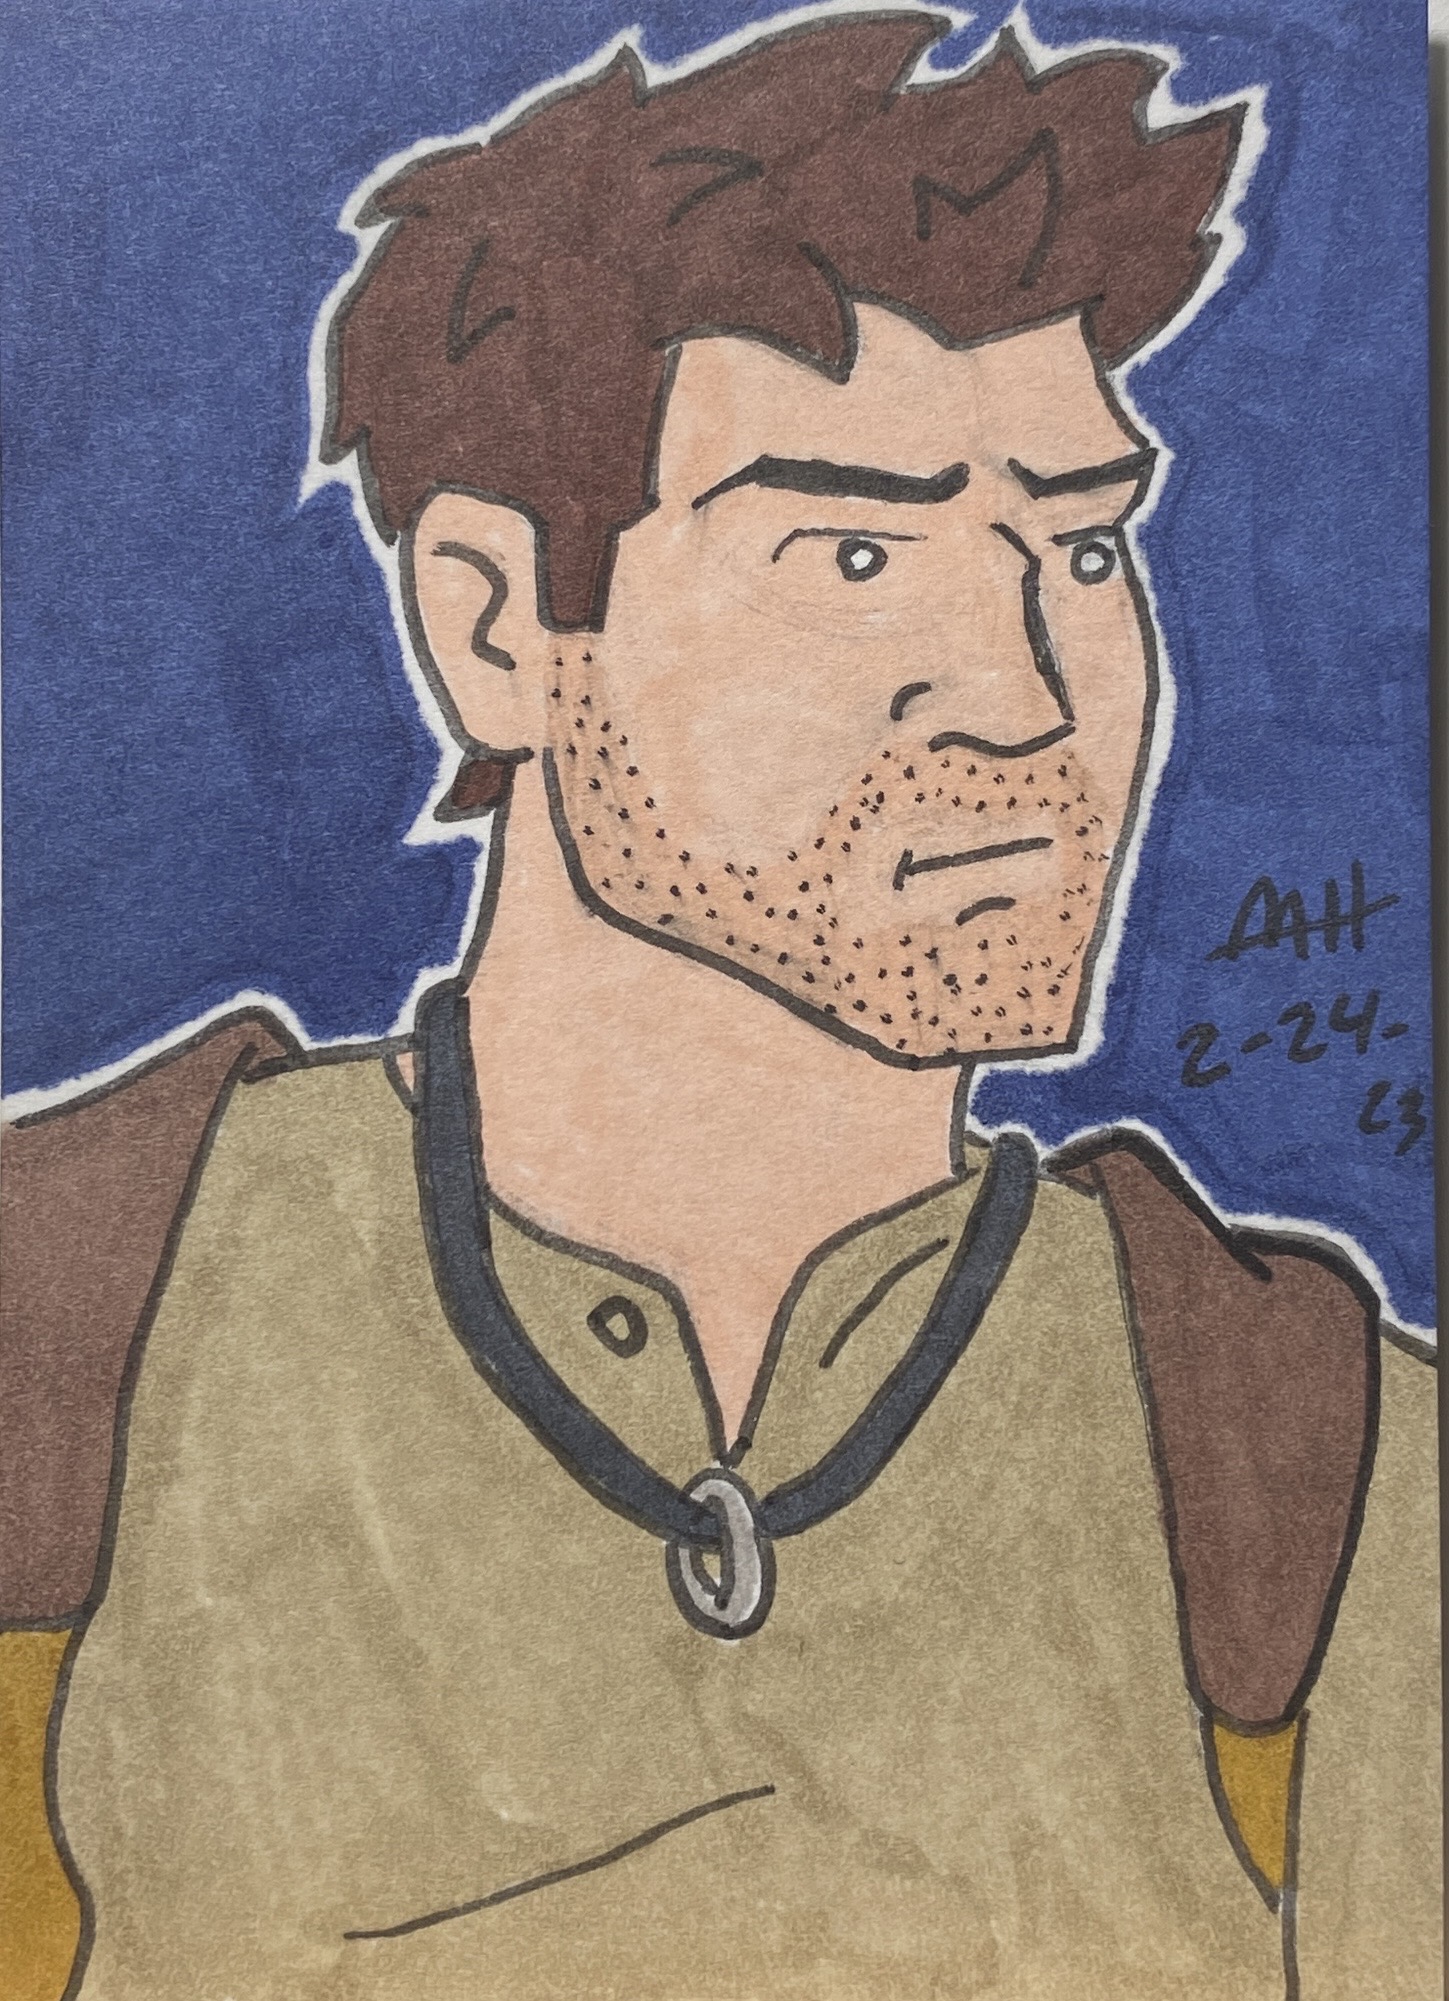 Uncharted 3 Nathan Drake by Cy689 on DeviantArt